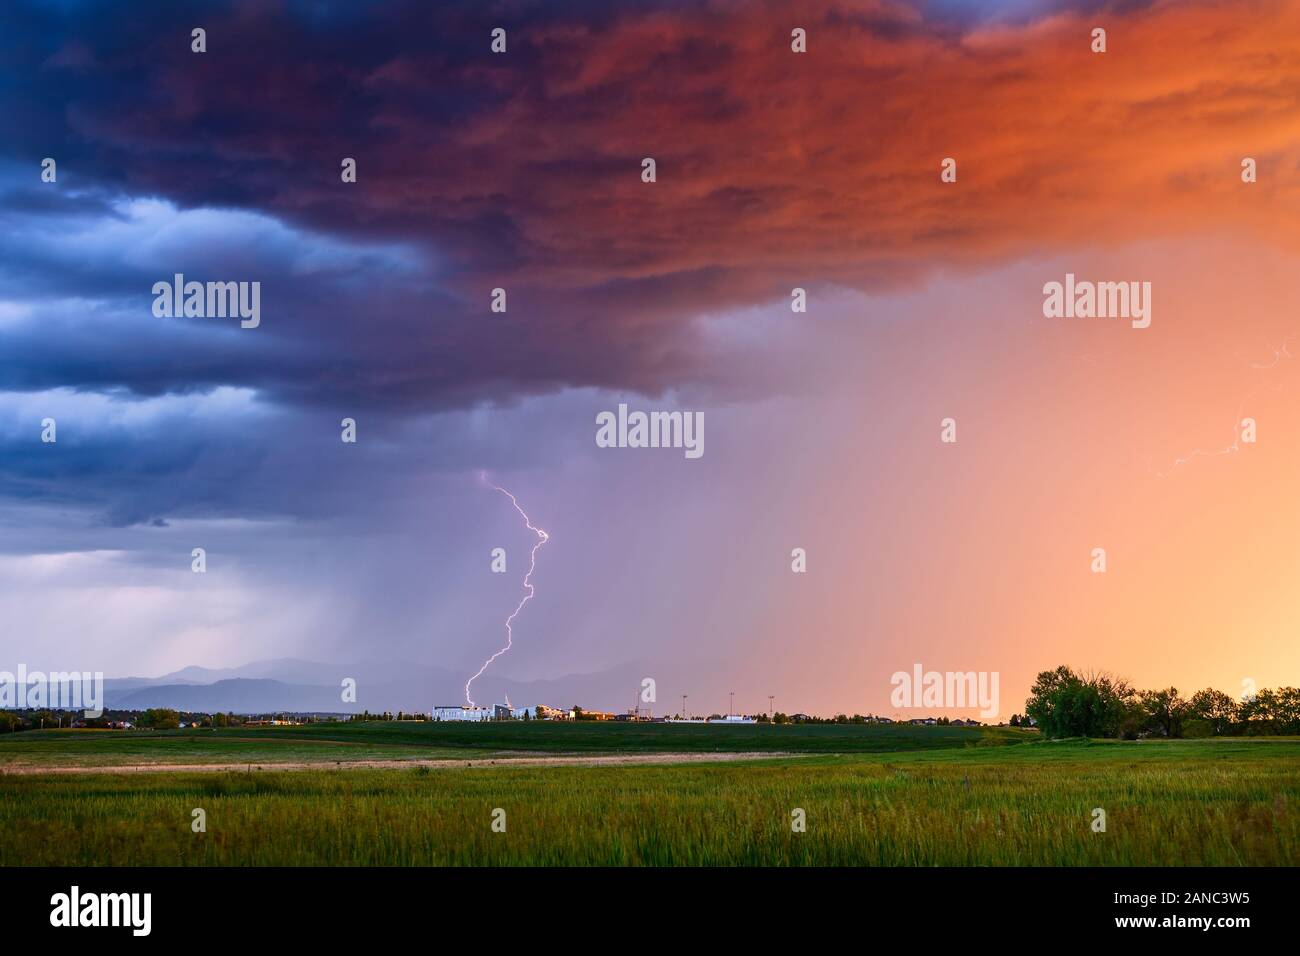 Scenic summer landscape and colorful sunset sky with thunderstorm lightning and heavy rain over Broomfield, Colorado Stock Photo